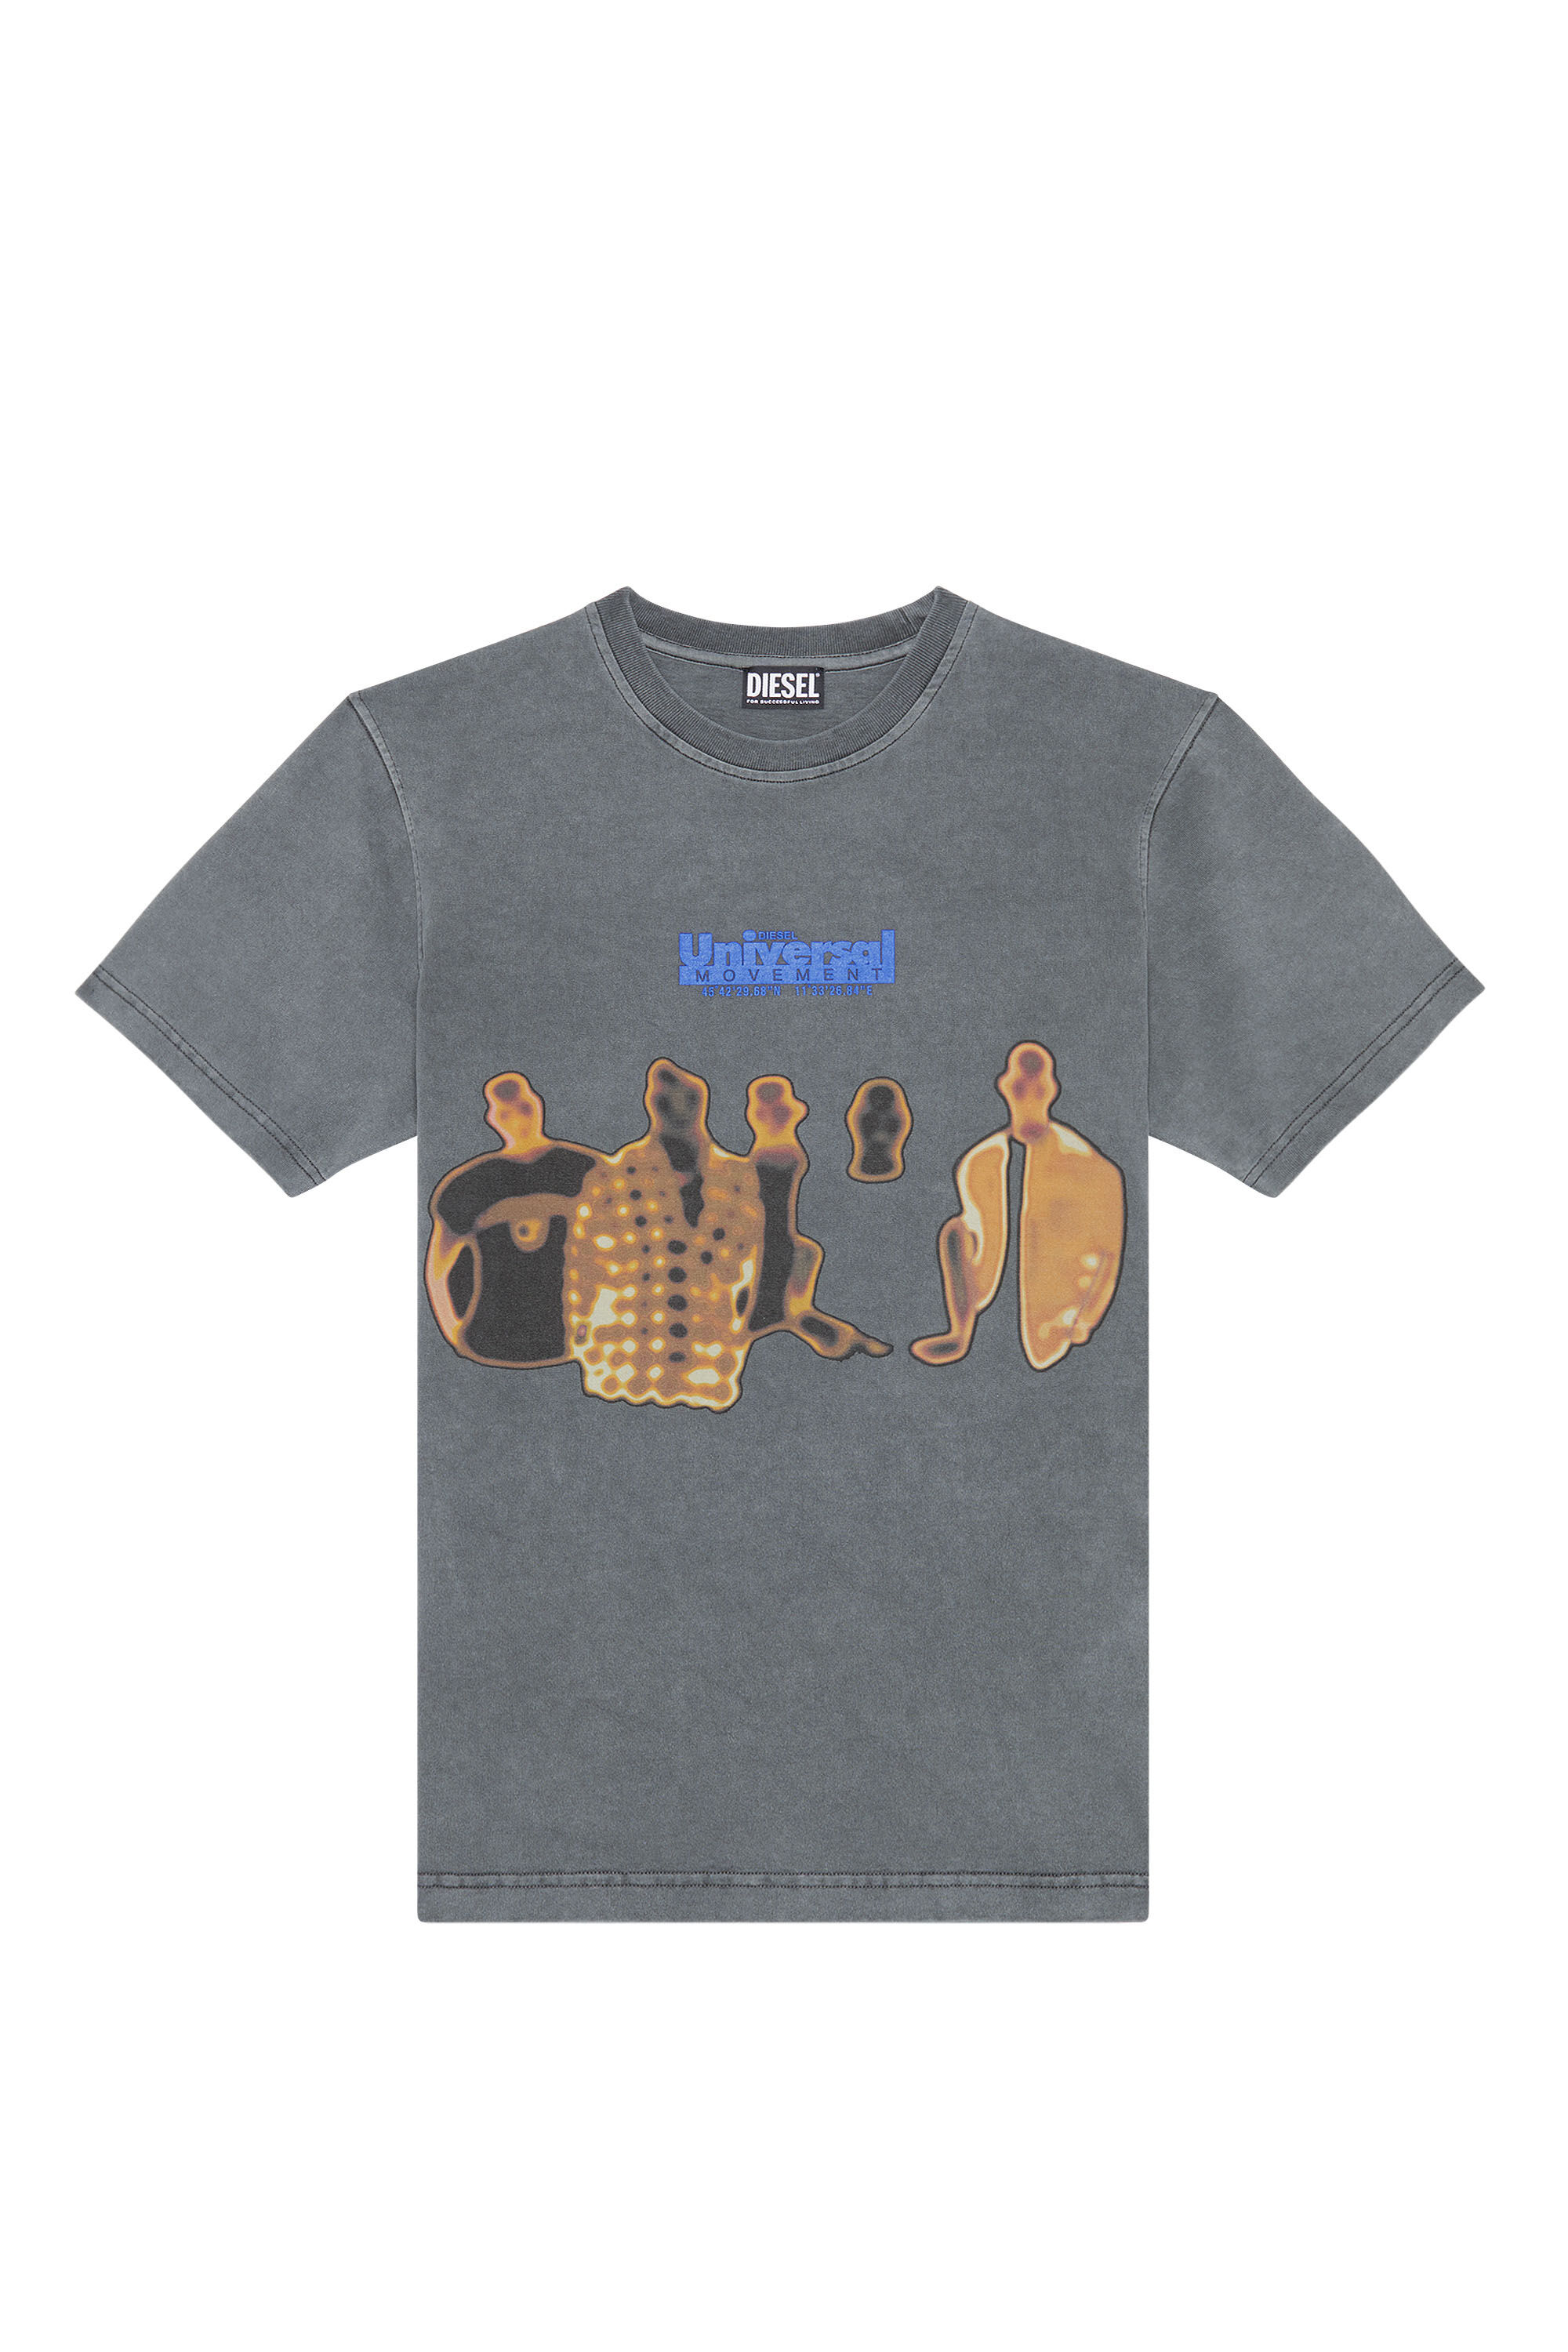 T-JUST-E29 Man: T-shirt with back puff print | Diesel